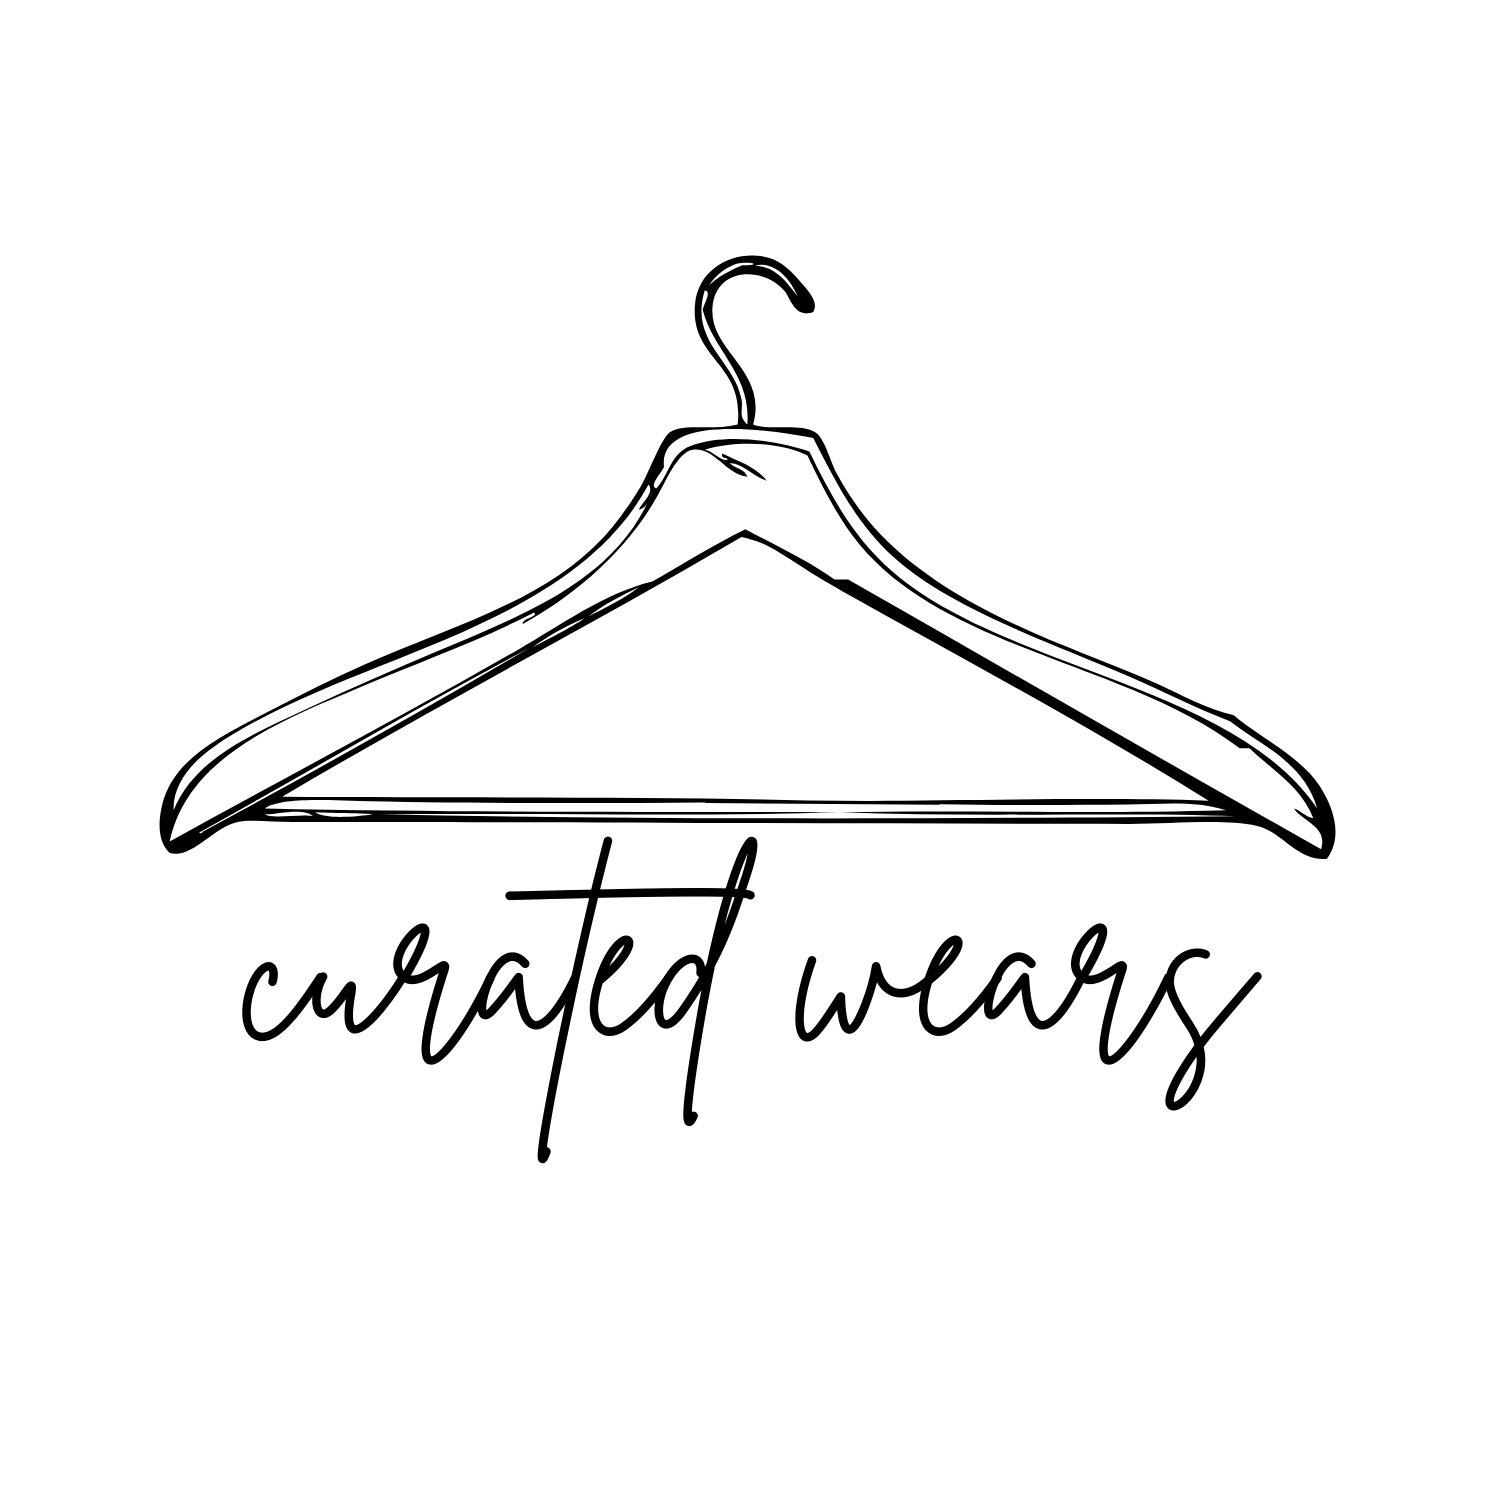 curated wears